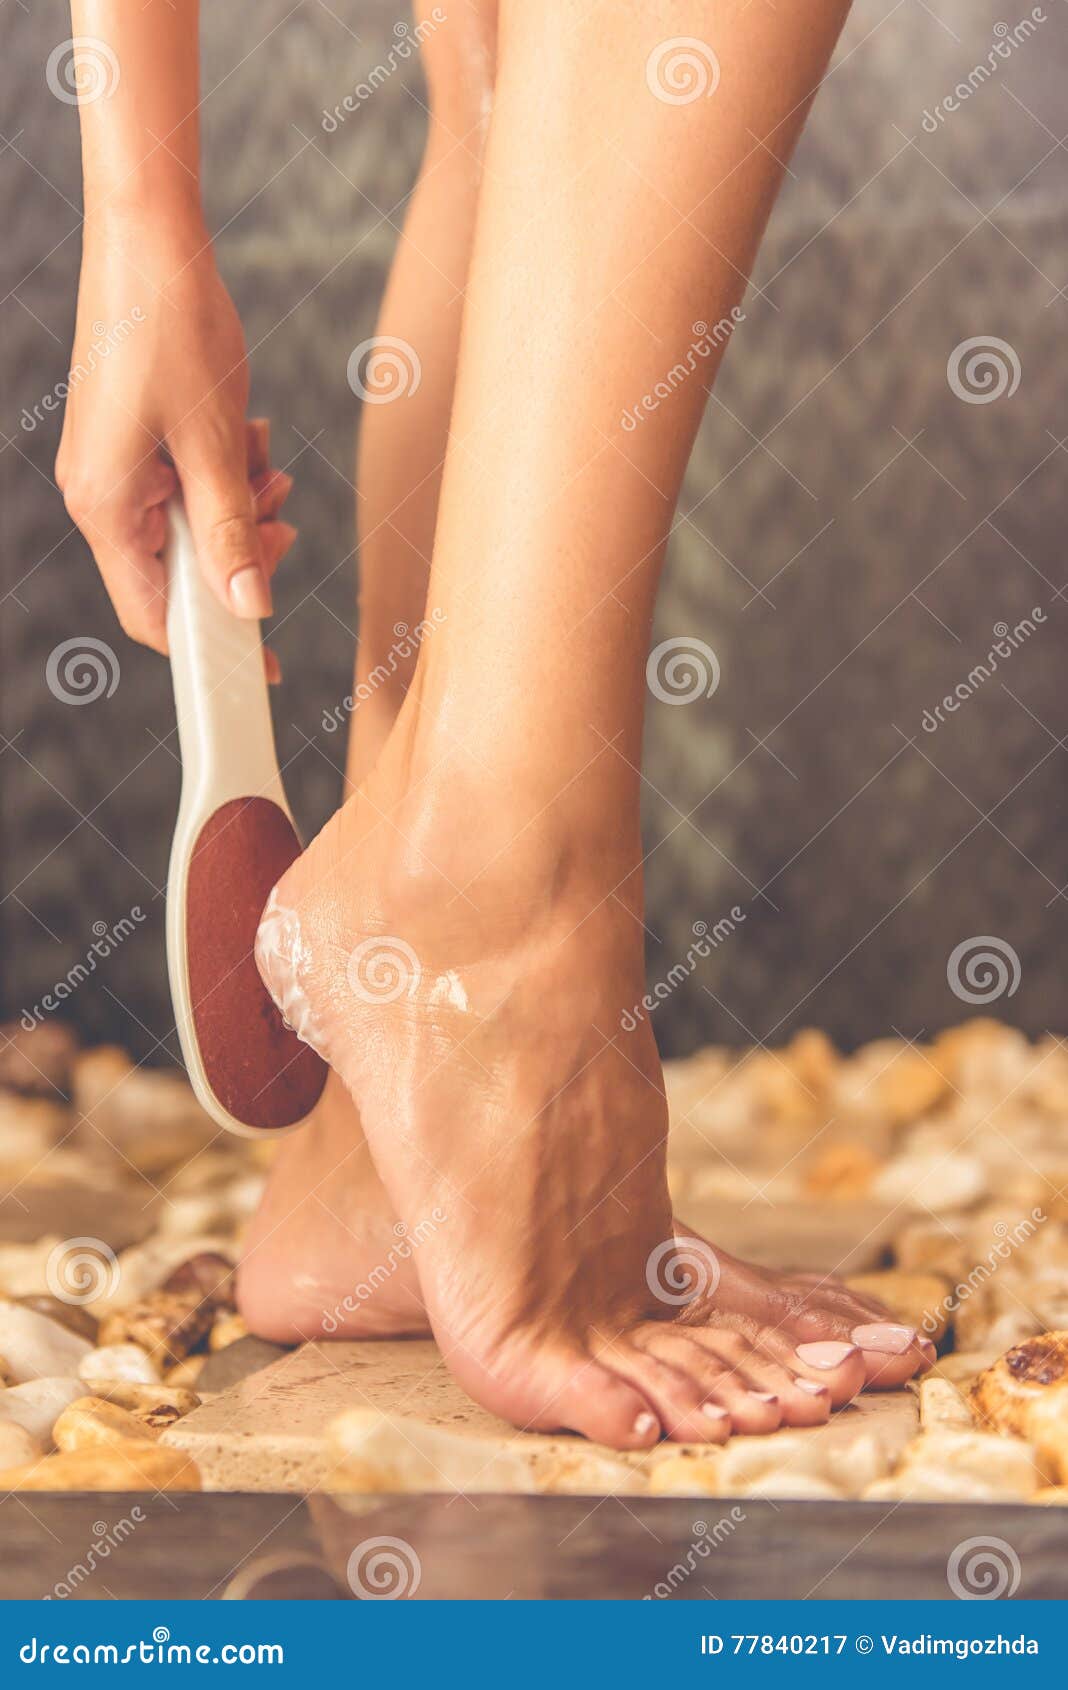 https://thumbs.dreamstime.com/z/beautiful-woman-taking-shower-cropped-image-young-scraping-heel-bathroom-77840217.jpg